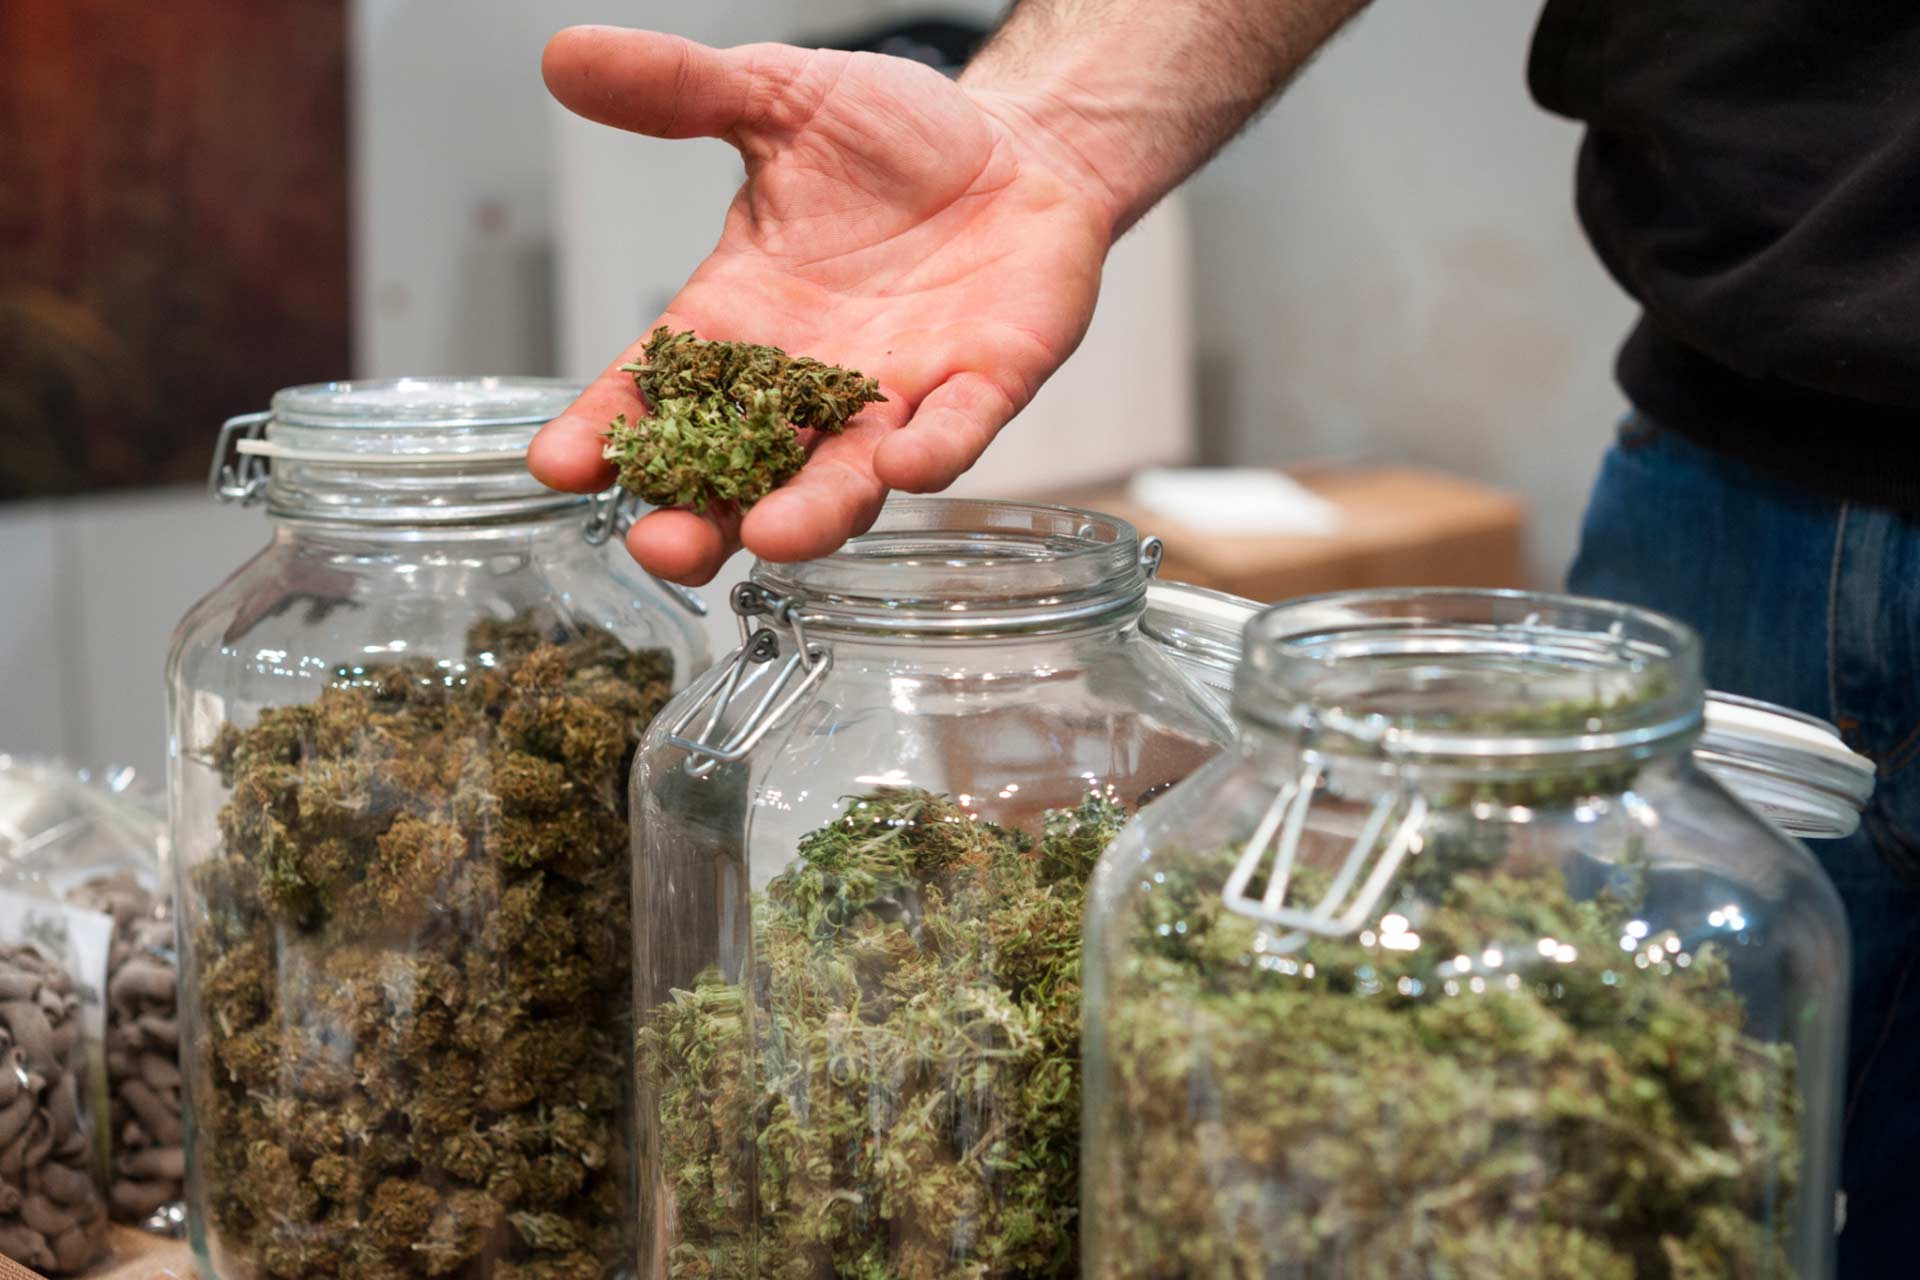 Budtender holding flower in palm of hand, with three jars containing different cannabis strains.